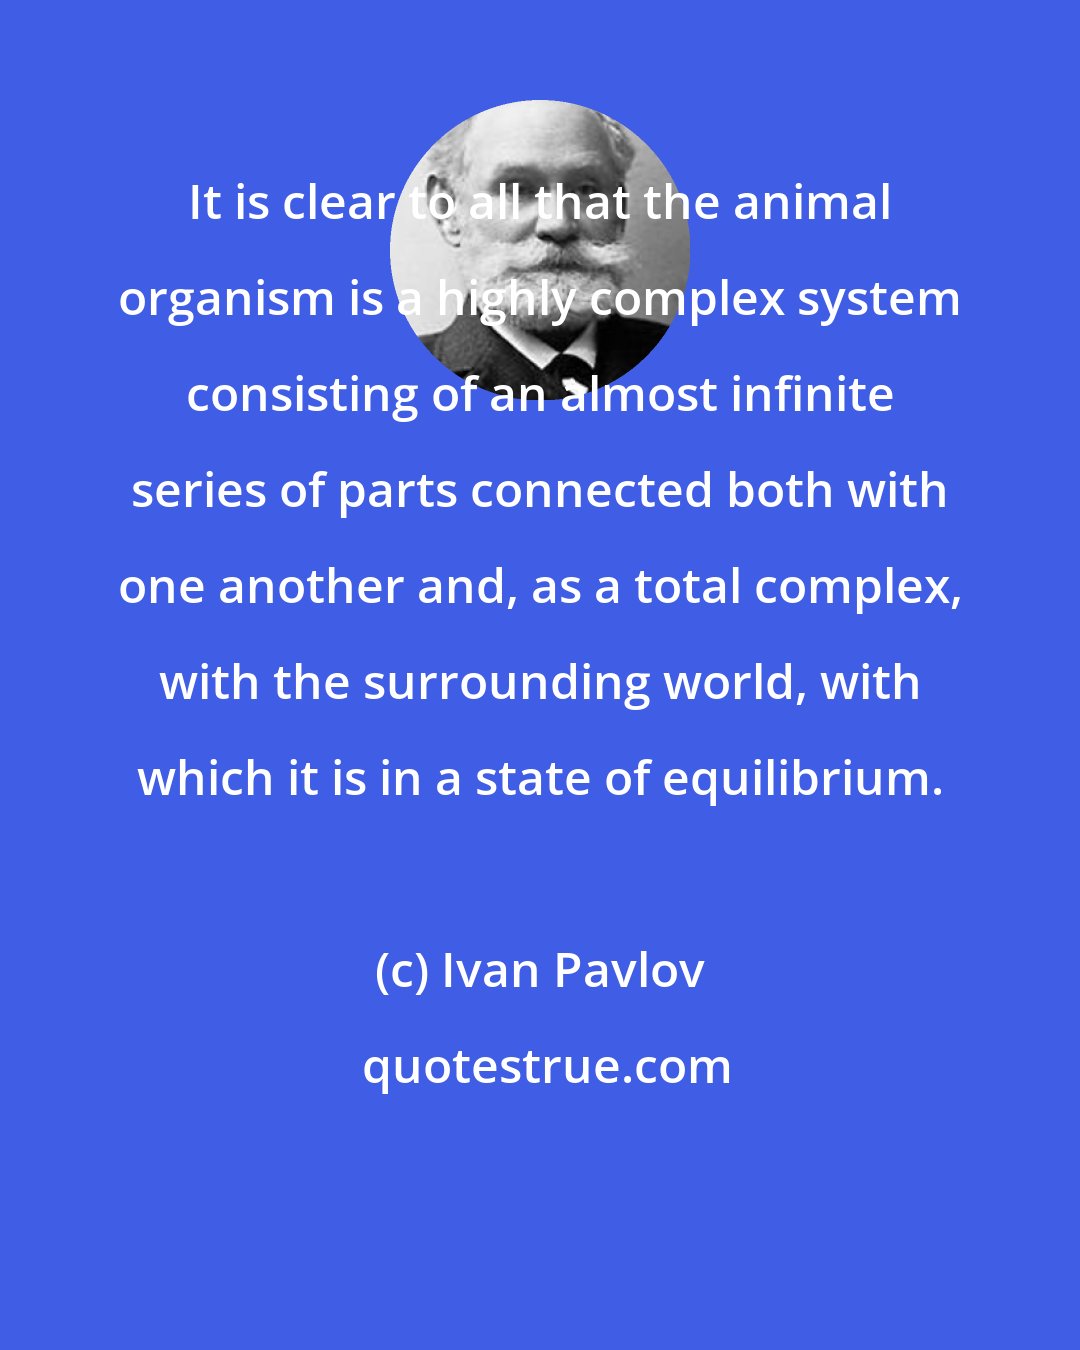 Ivan Pavlov: It is clear to all that the animal organism is a highly complex system consisting of an almost infinite series of parts connected both with one another and, as a total complex, with the surrounding world, with which it is in a state of equilibrium.